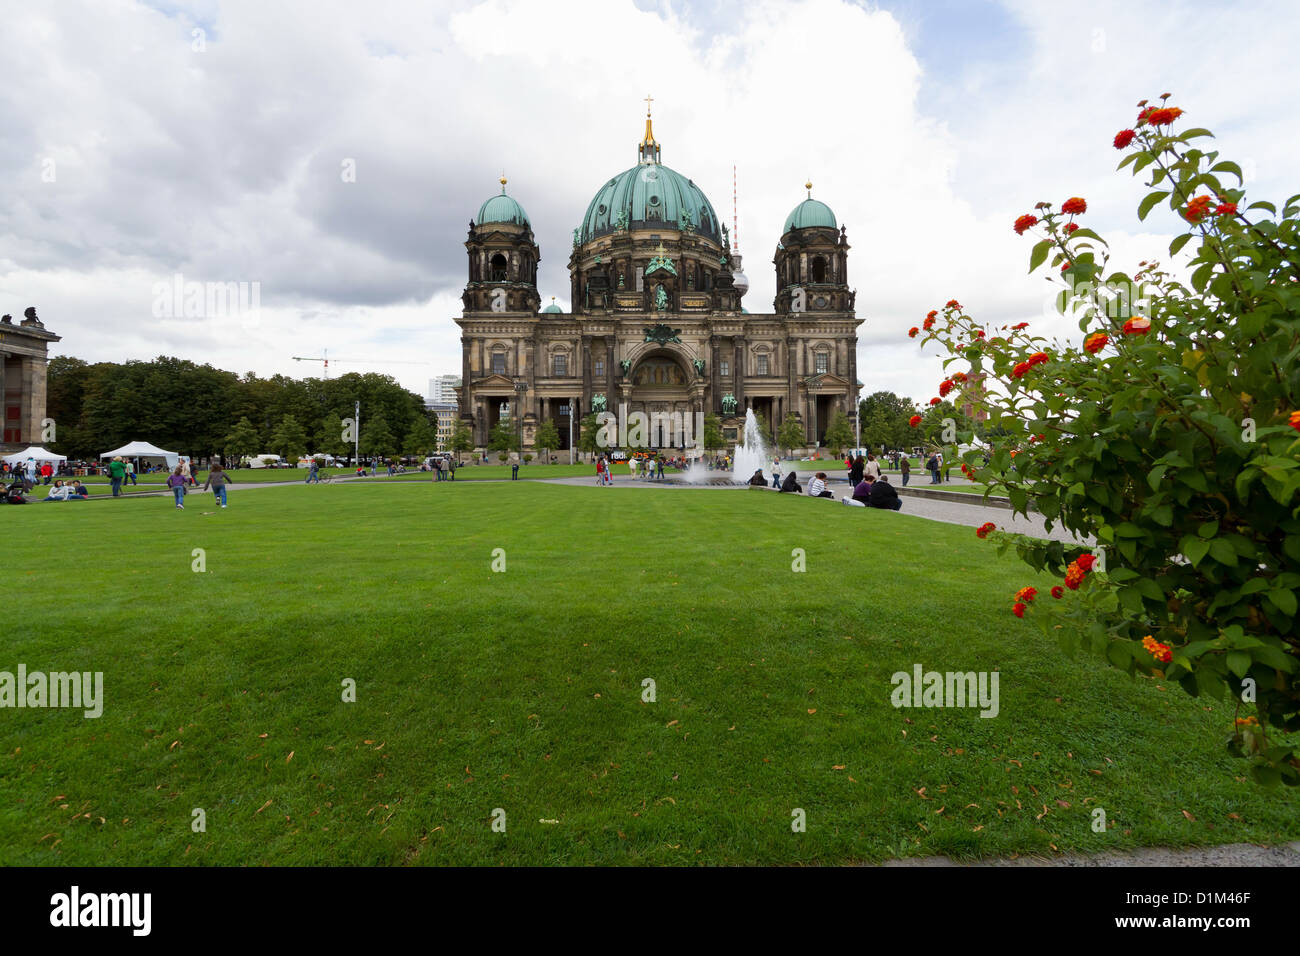 The Berlin Cathedral, Germany Stock Photo